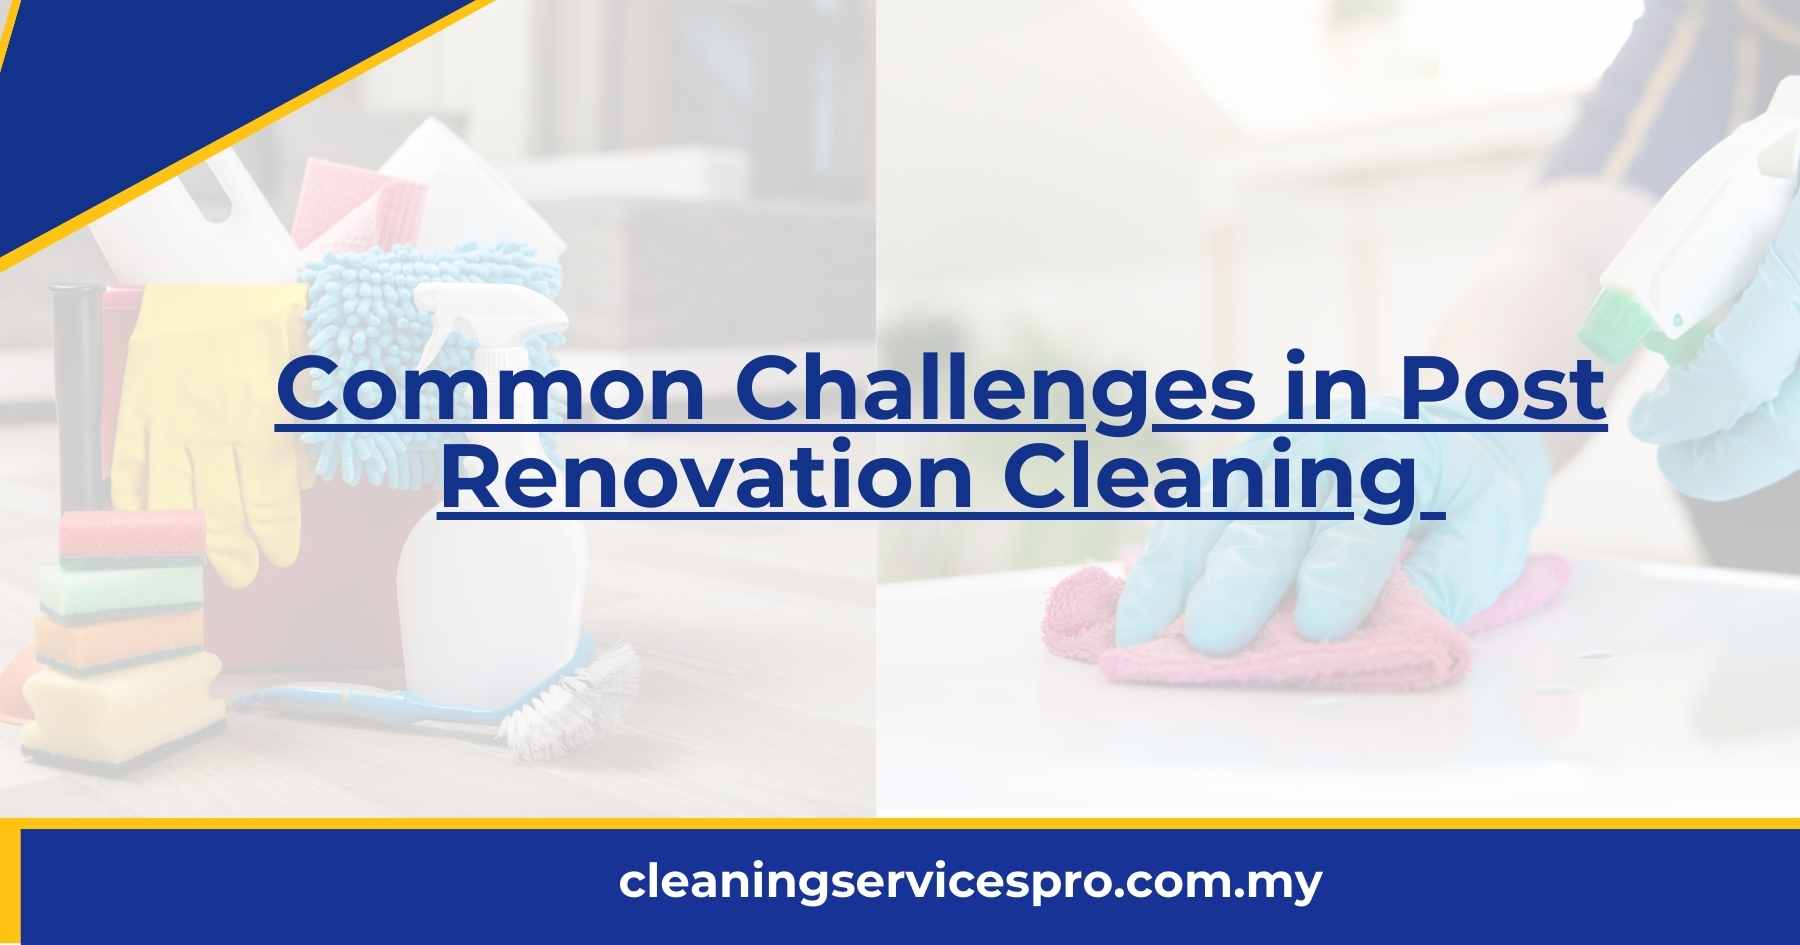 Common Challenges in Post Renovation Cleaning